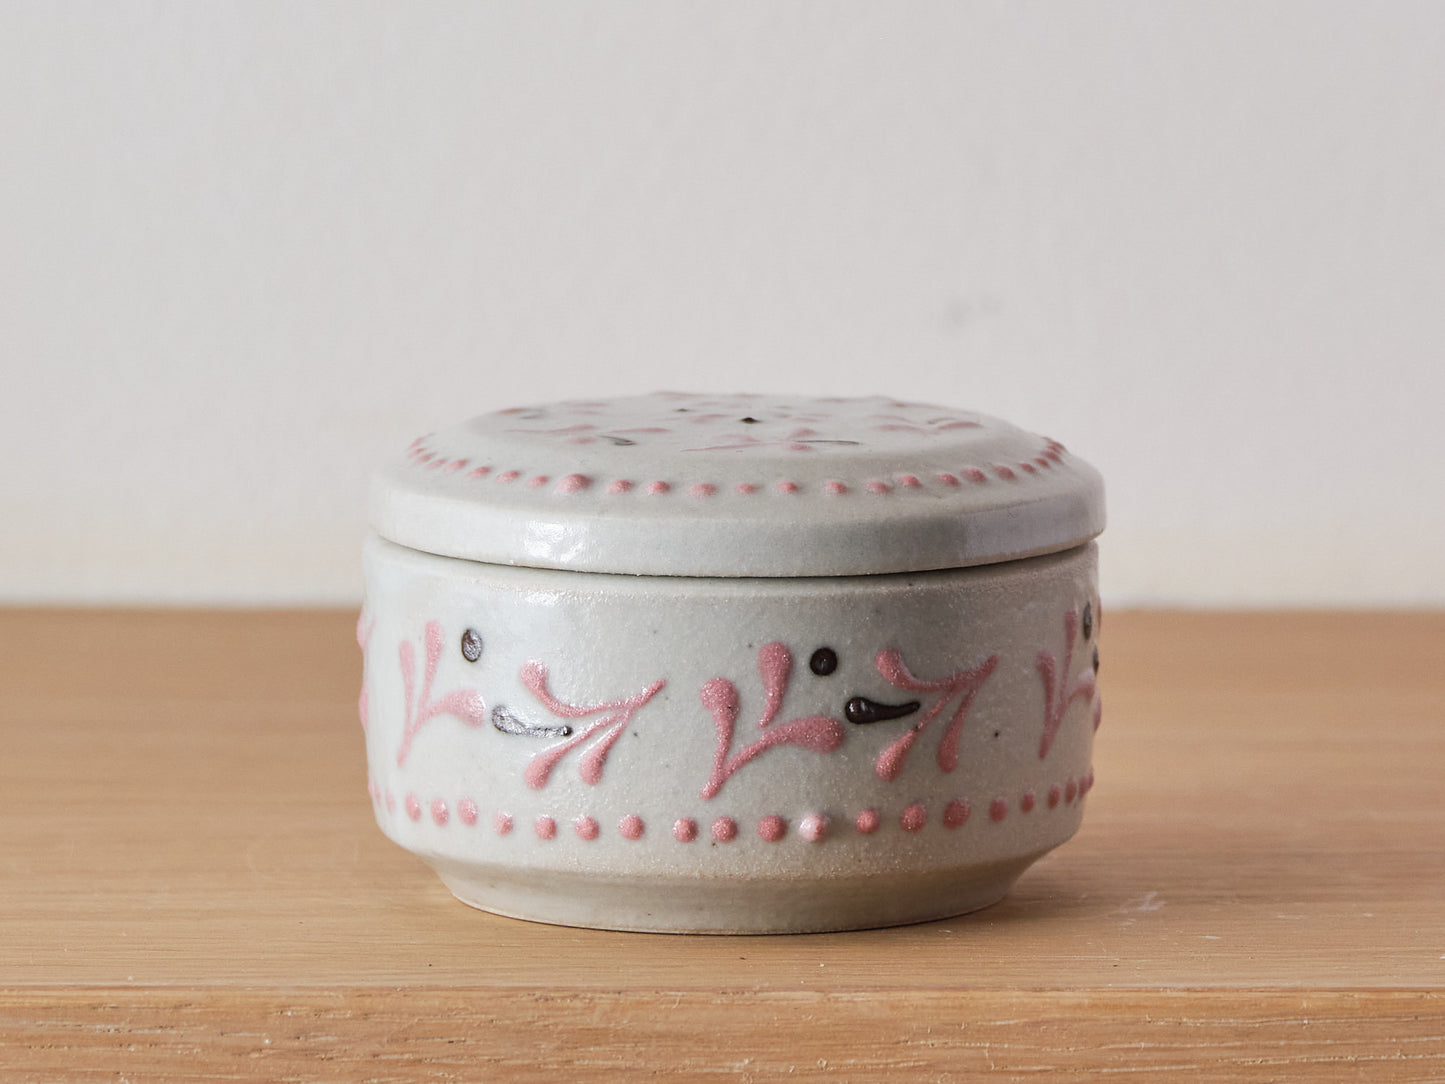 Cherry Blossom Patterned Pot with Lid by Tomoka Nomura